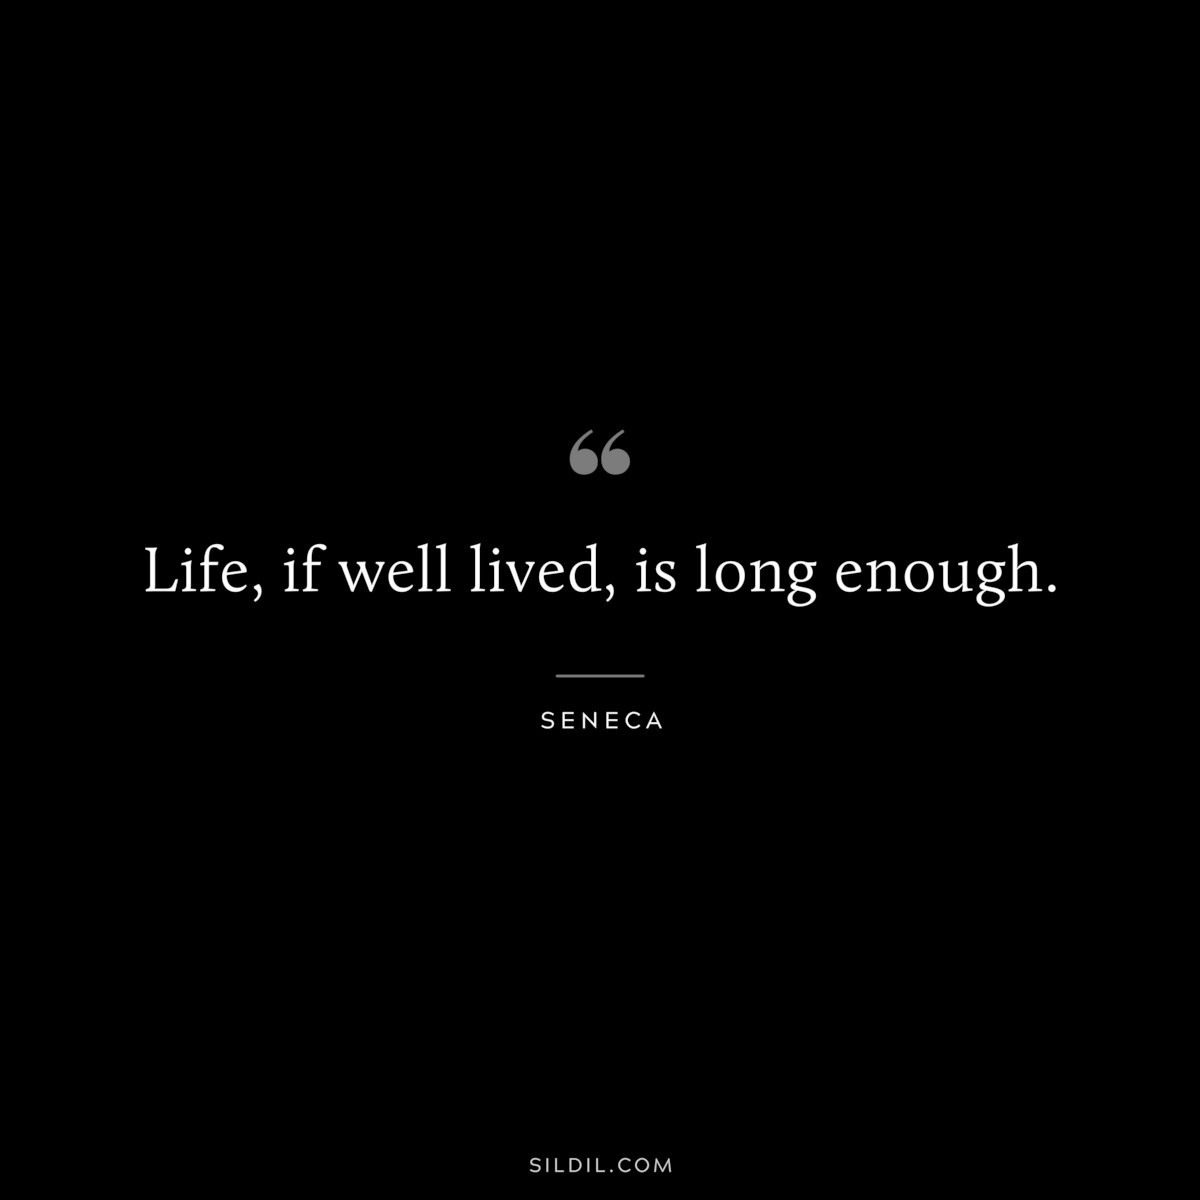 Life, if well lived, is long enough. ― Seneca